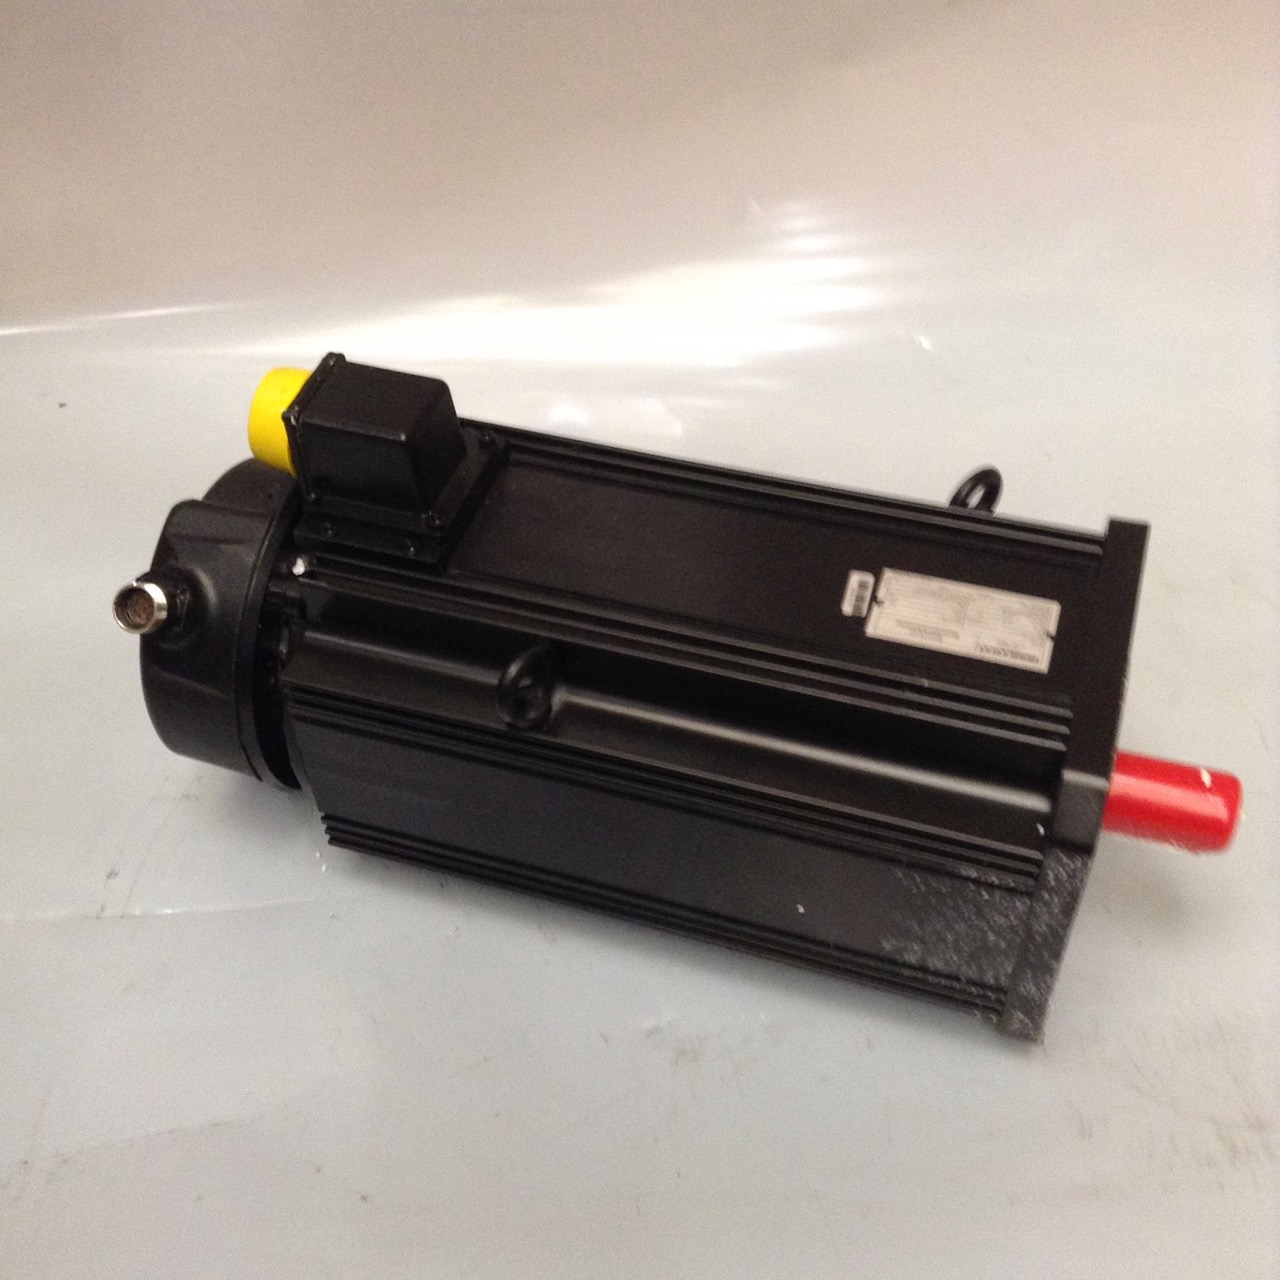 New Asynchronous motor, main spindle drive, 2AD100C-B05OB1-AS03-C2N